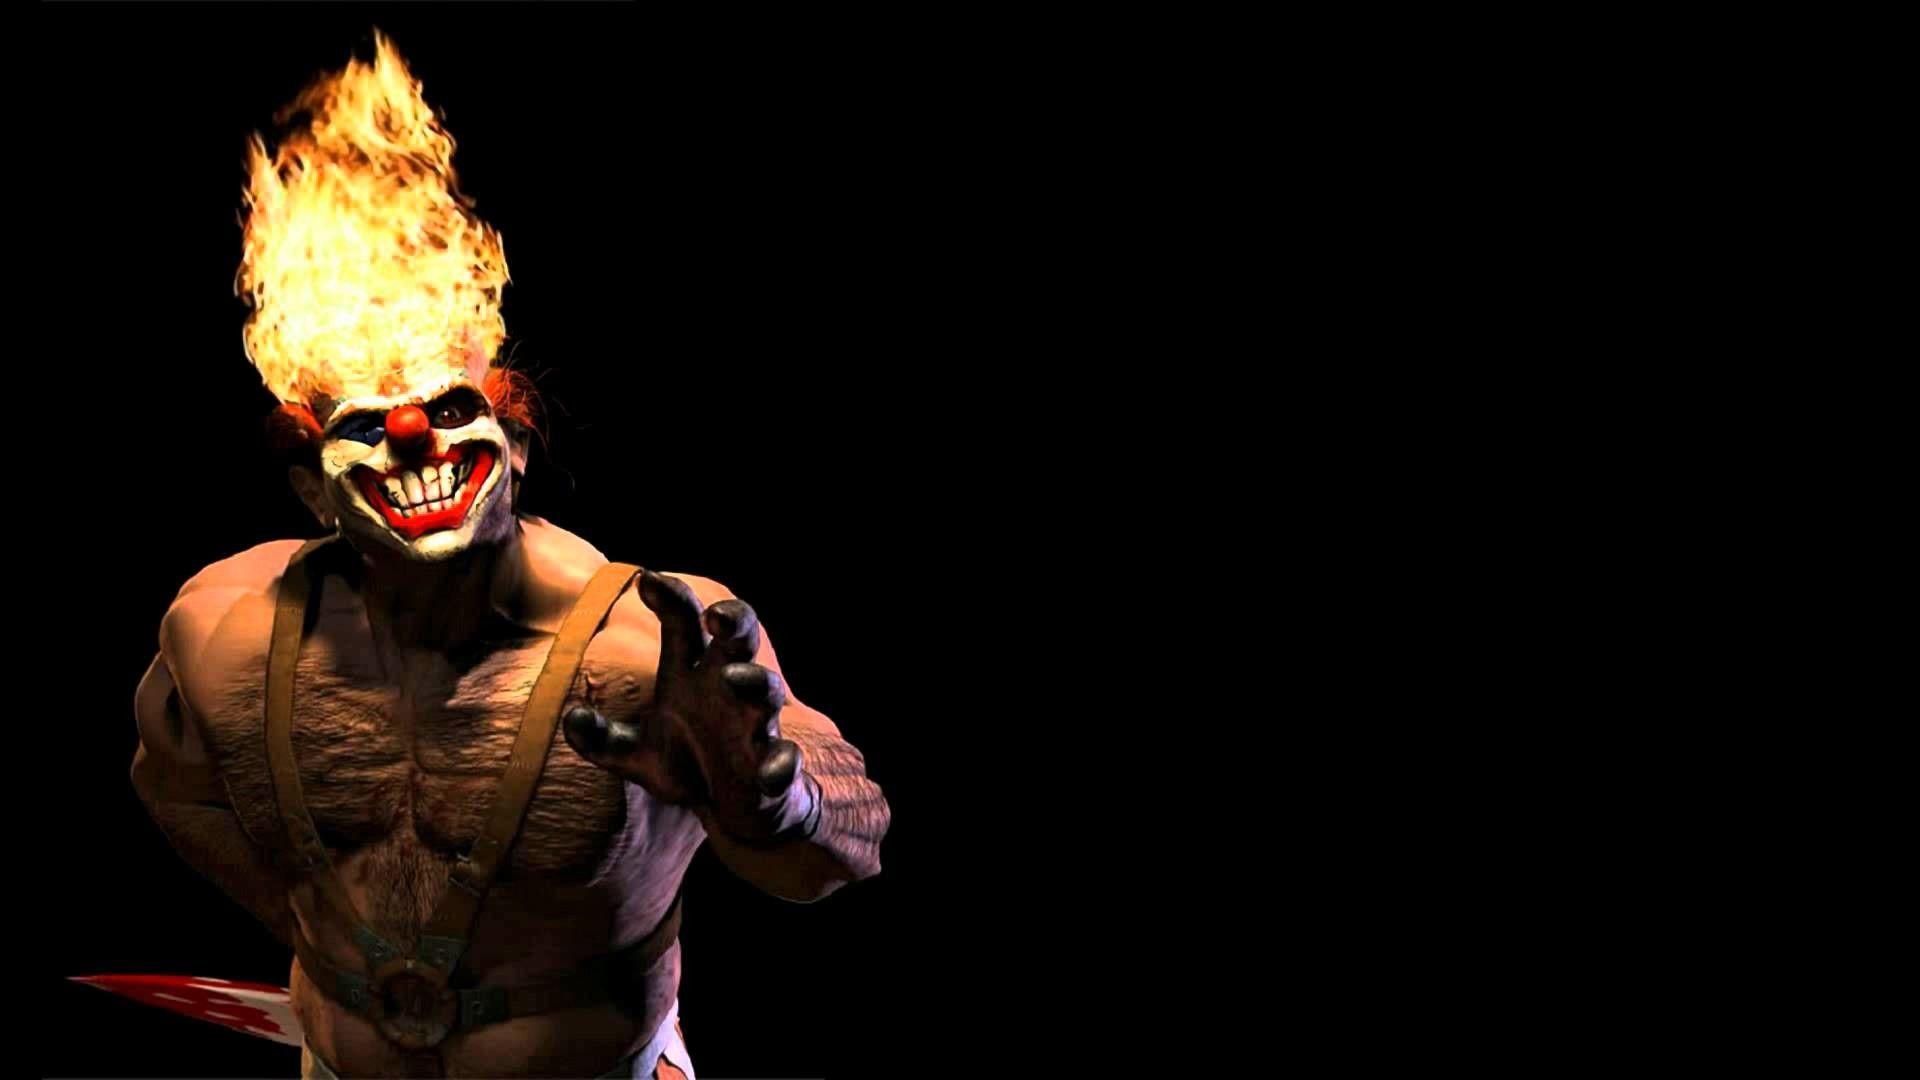 Twisted Metal Sweet Tooth Wallpaper